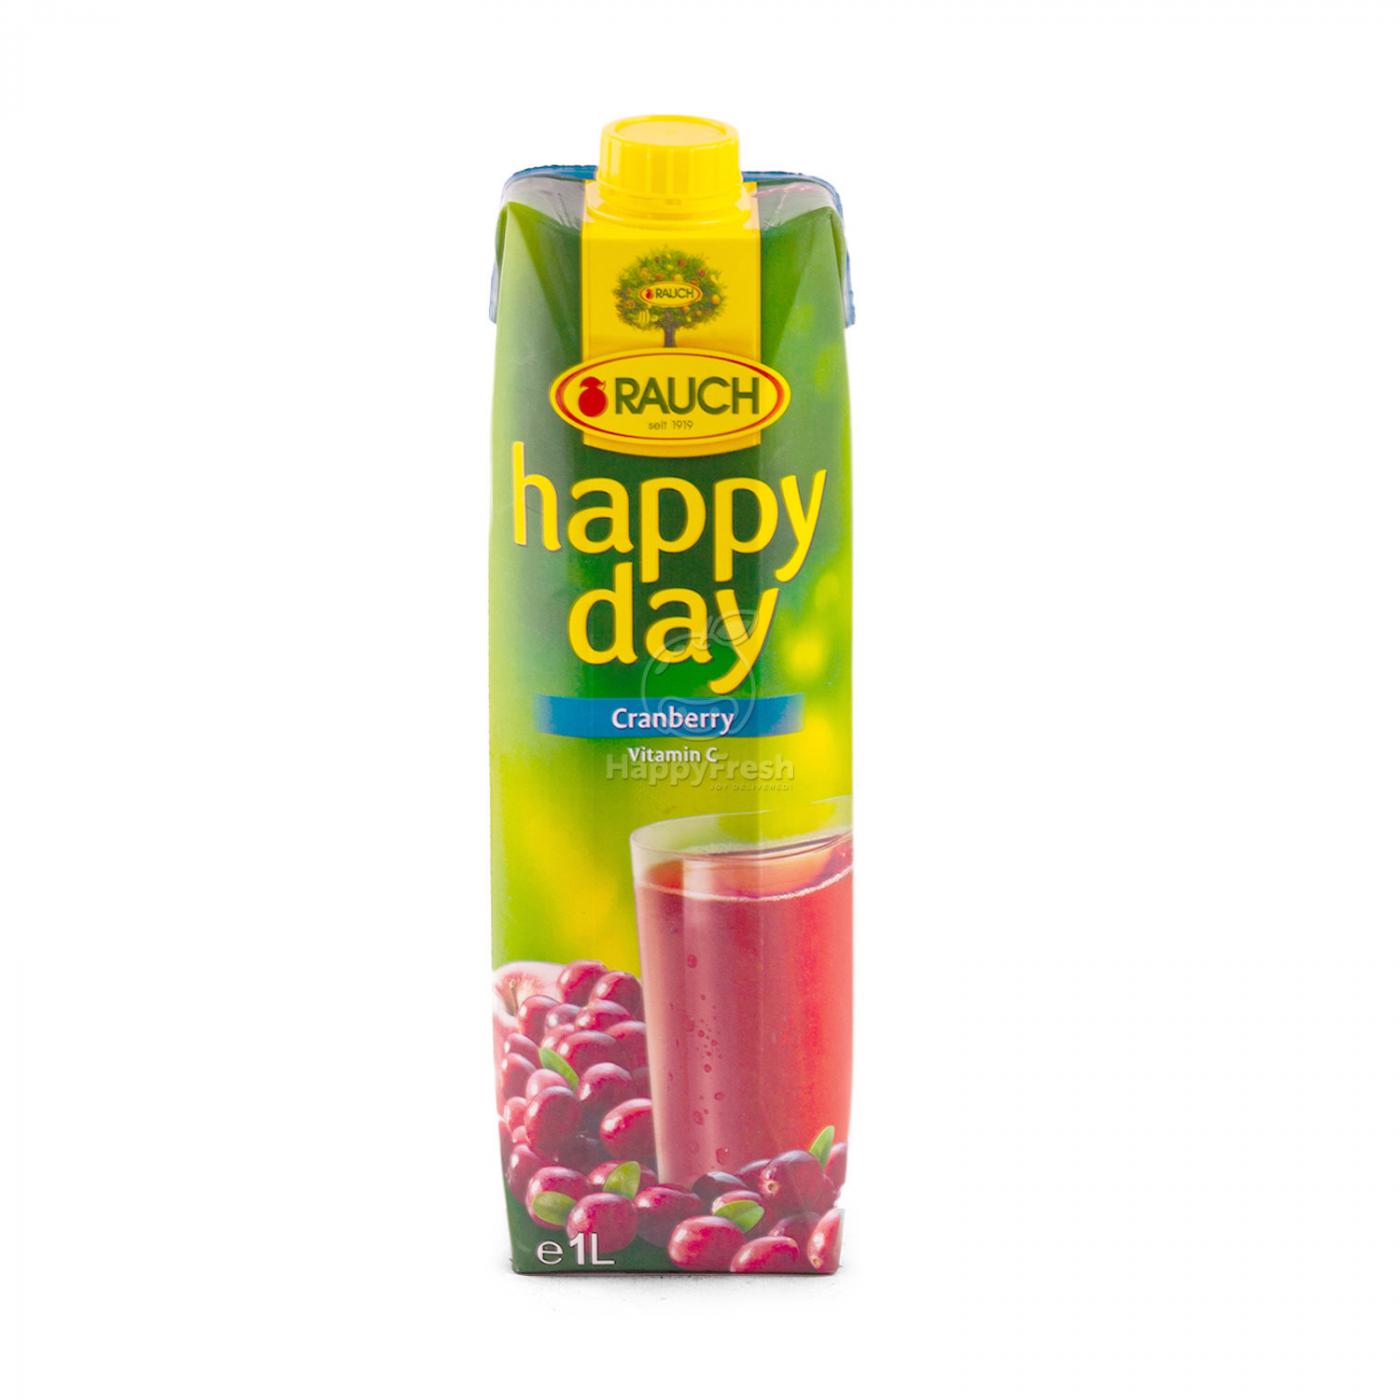 Rauch happy day cranberry 1 l 